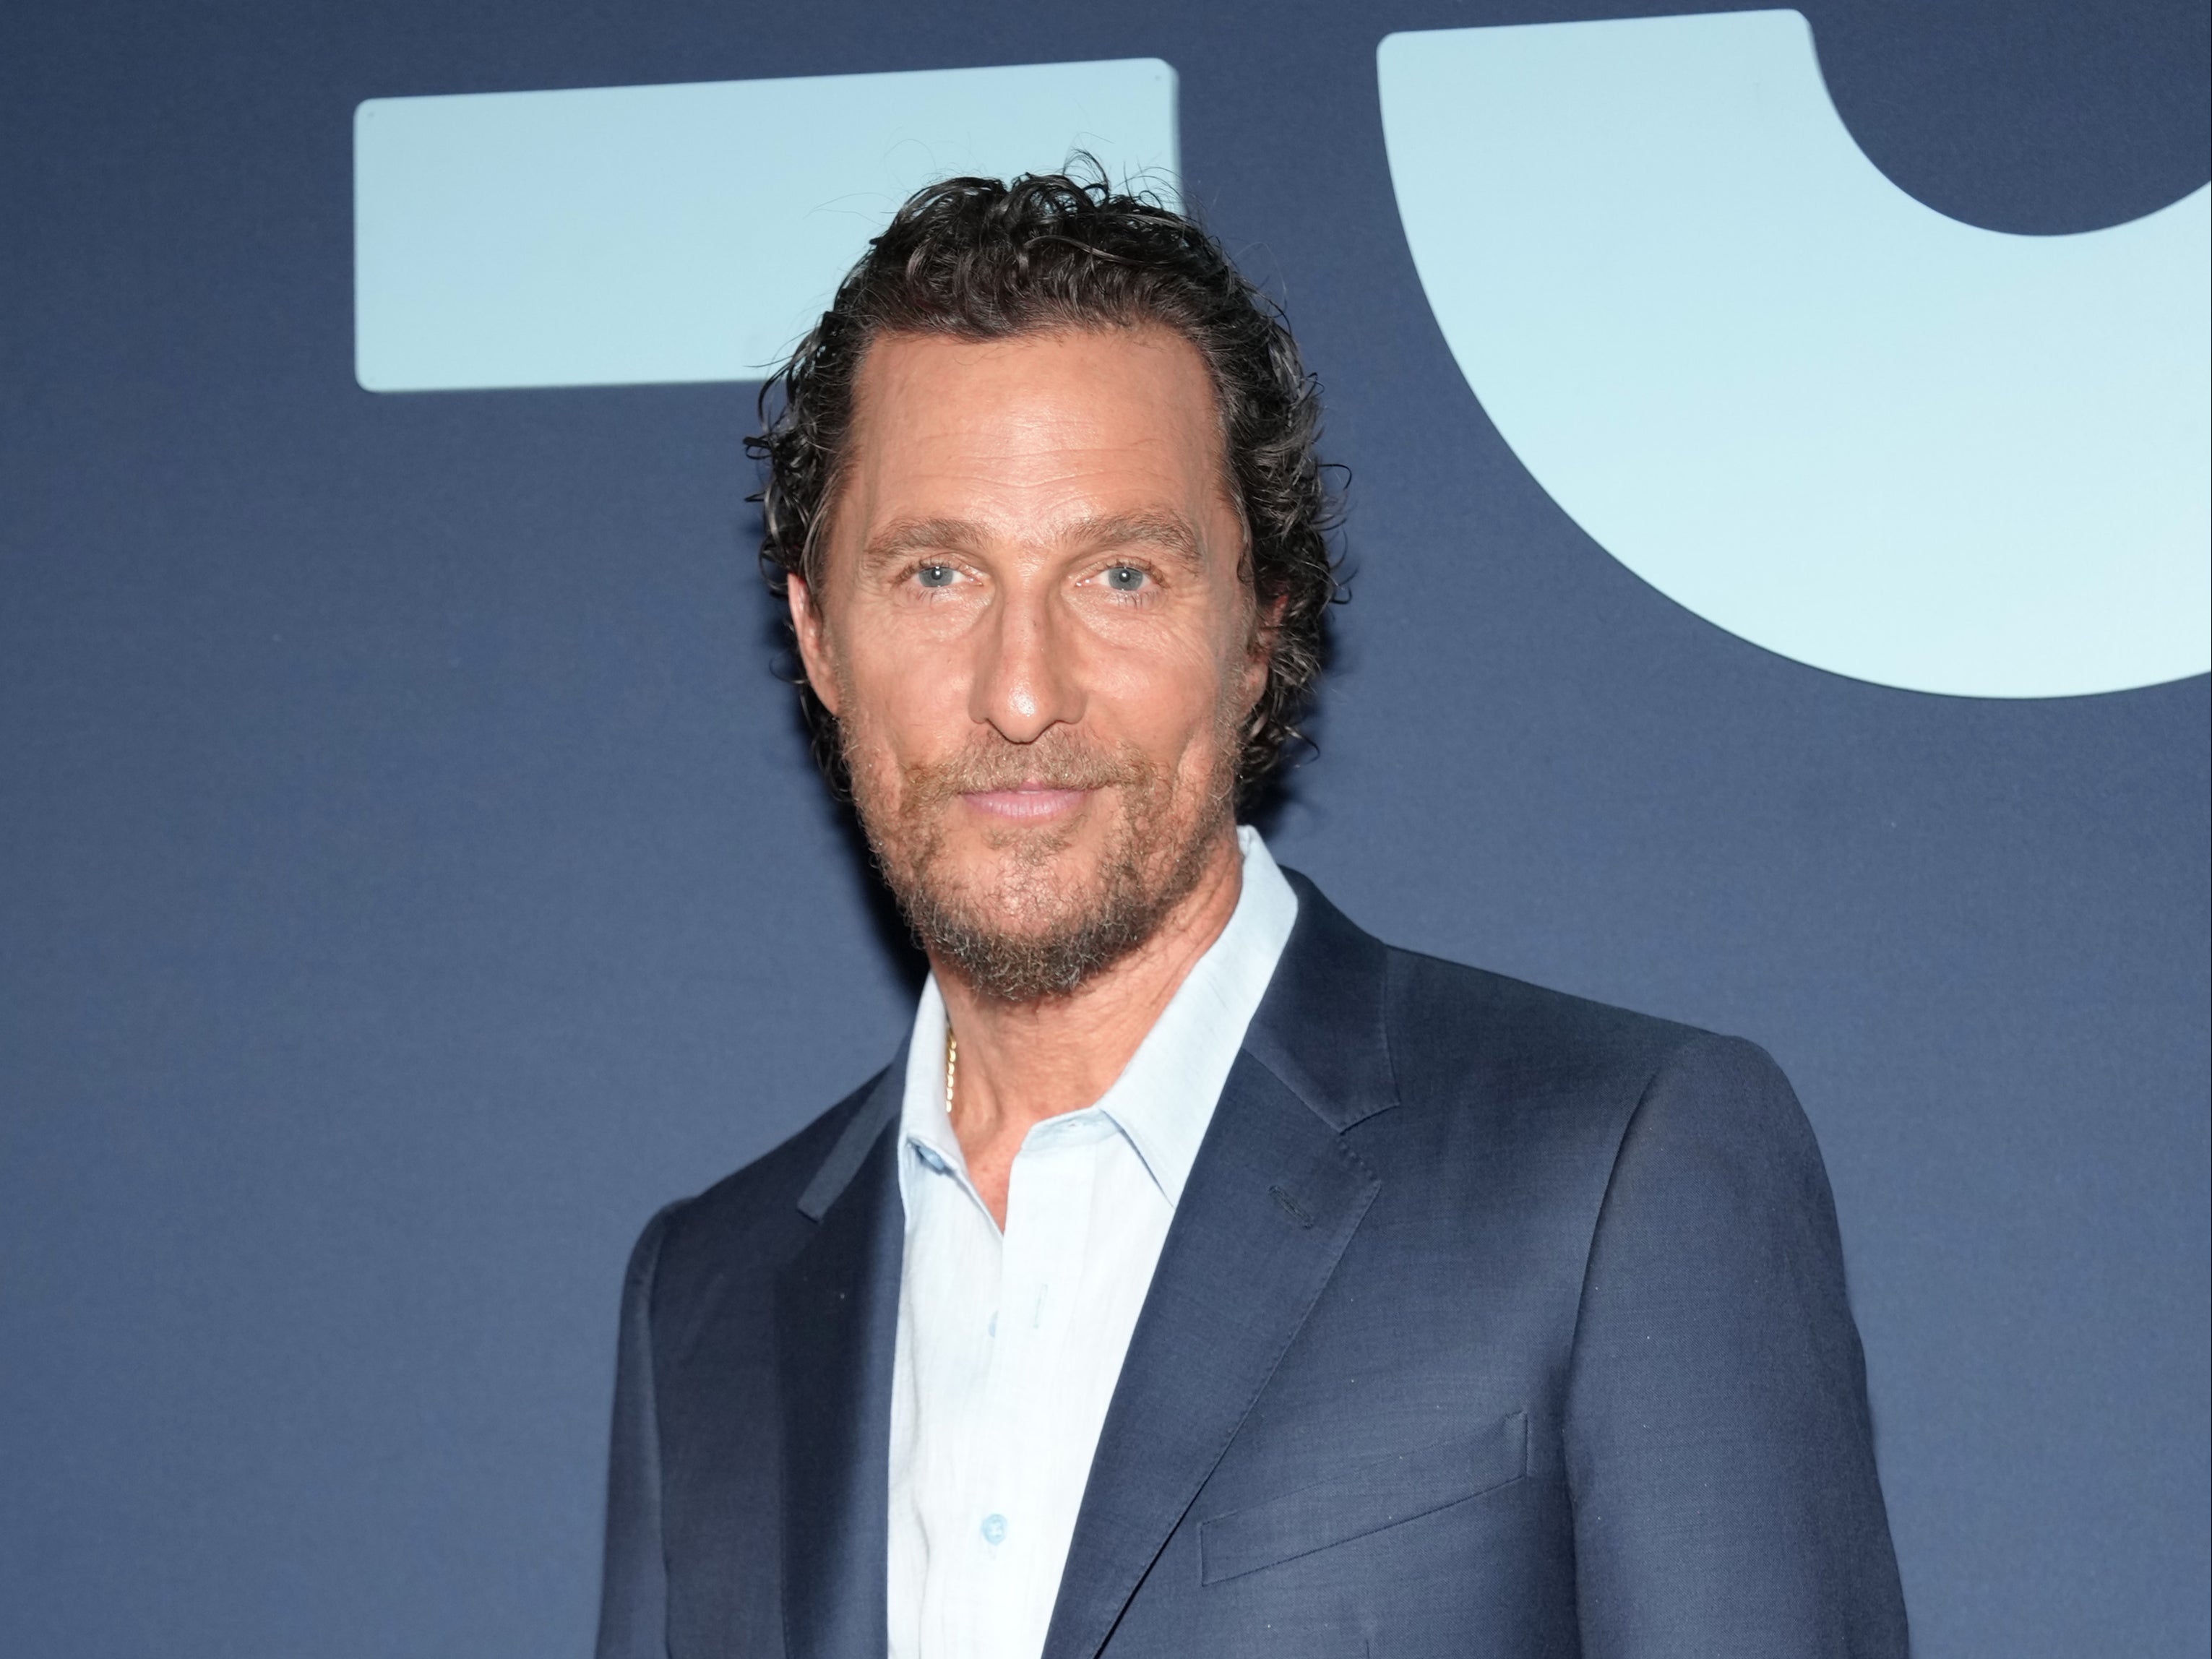 Matthew McConaughey has repeated the idea that he has thought about running for political office